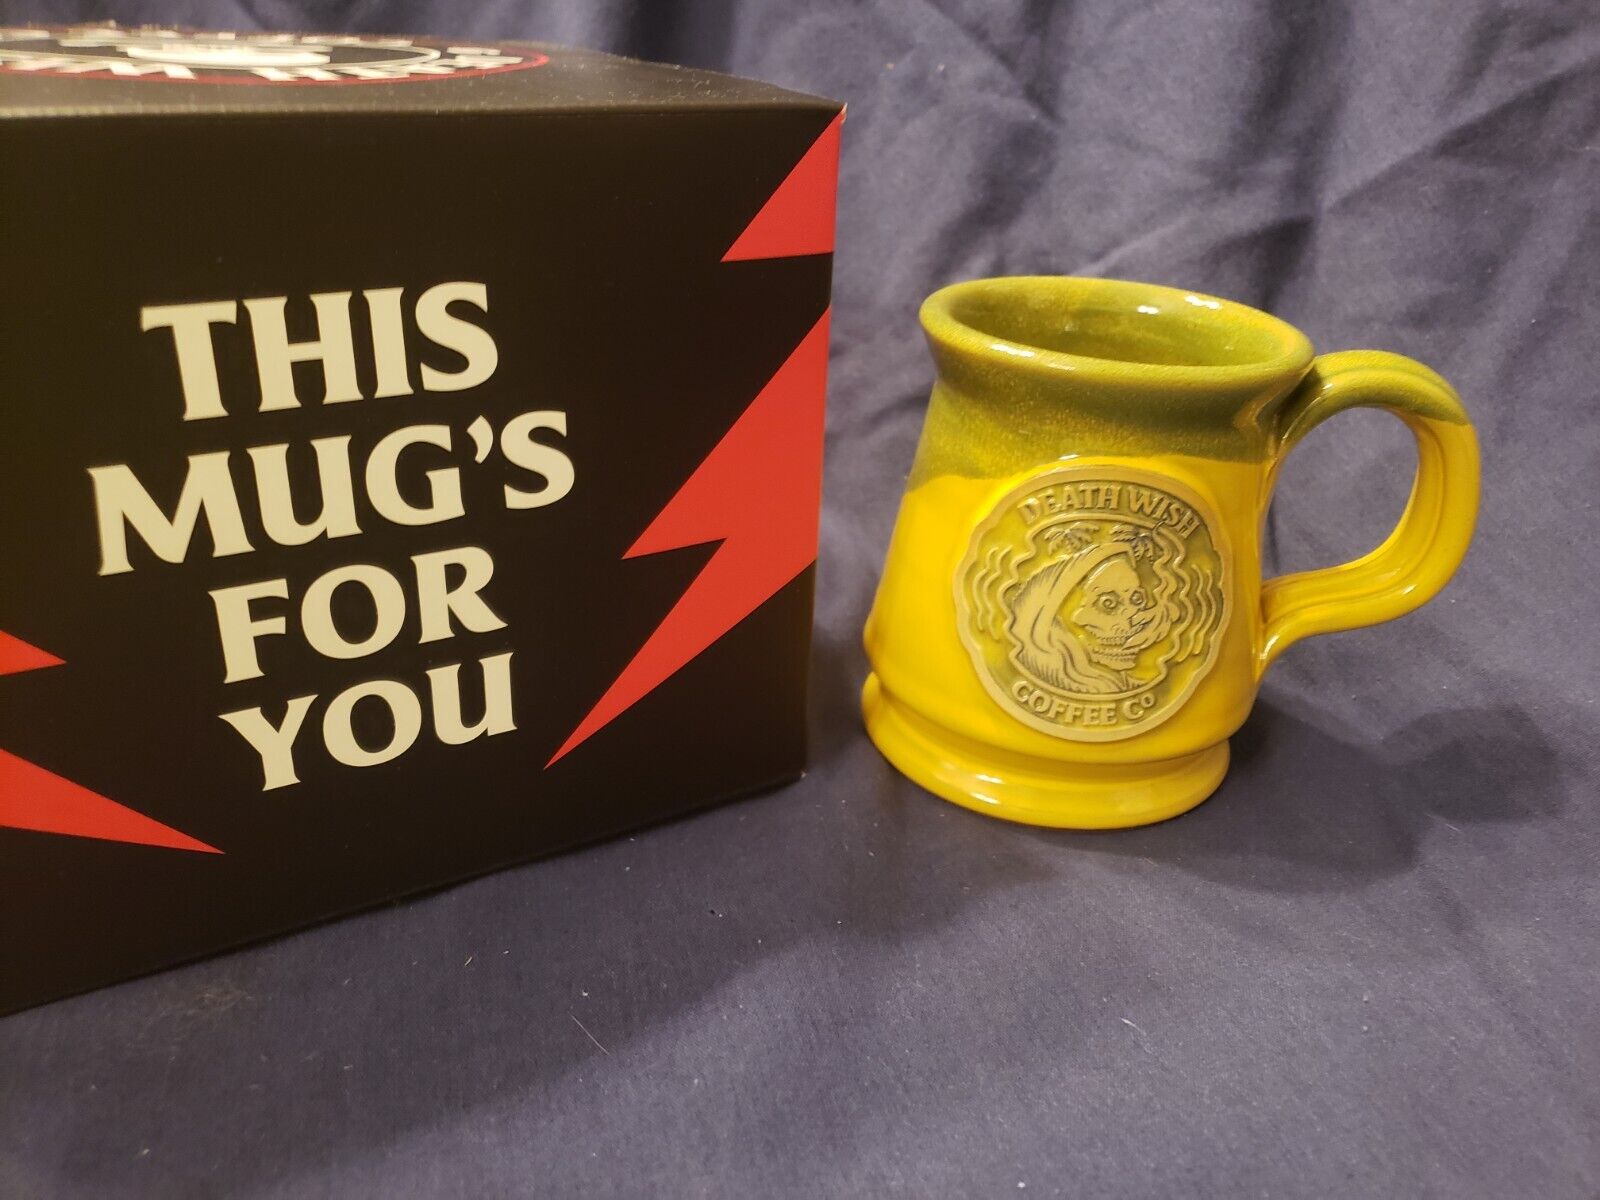 Death Wish Pineapple Espresso: Hazed + Confused Mug #1031 Only 1500 made